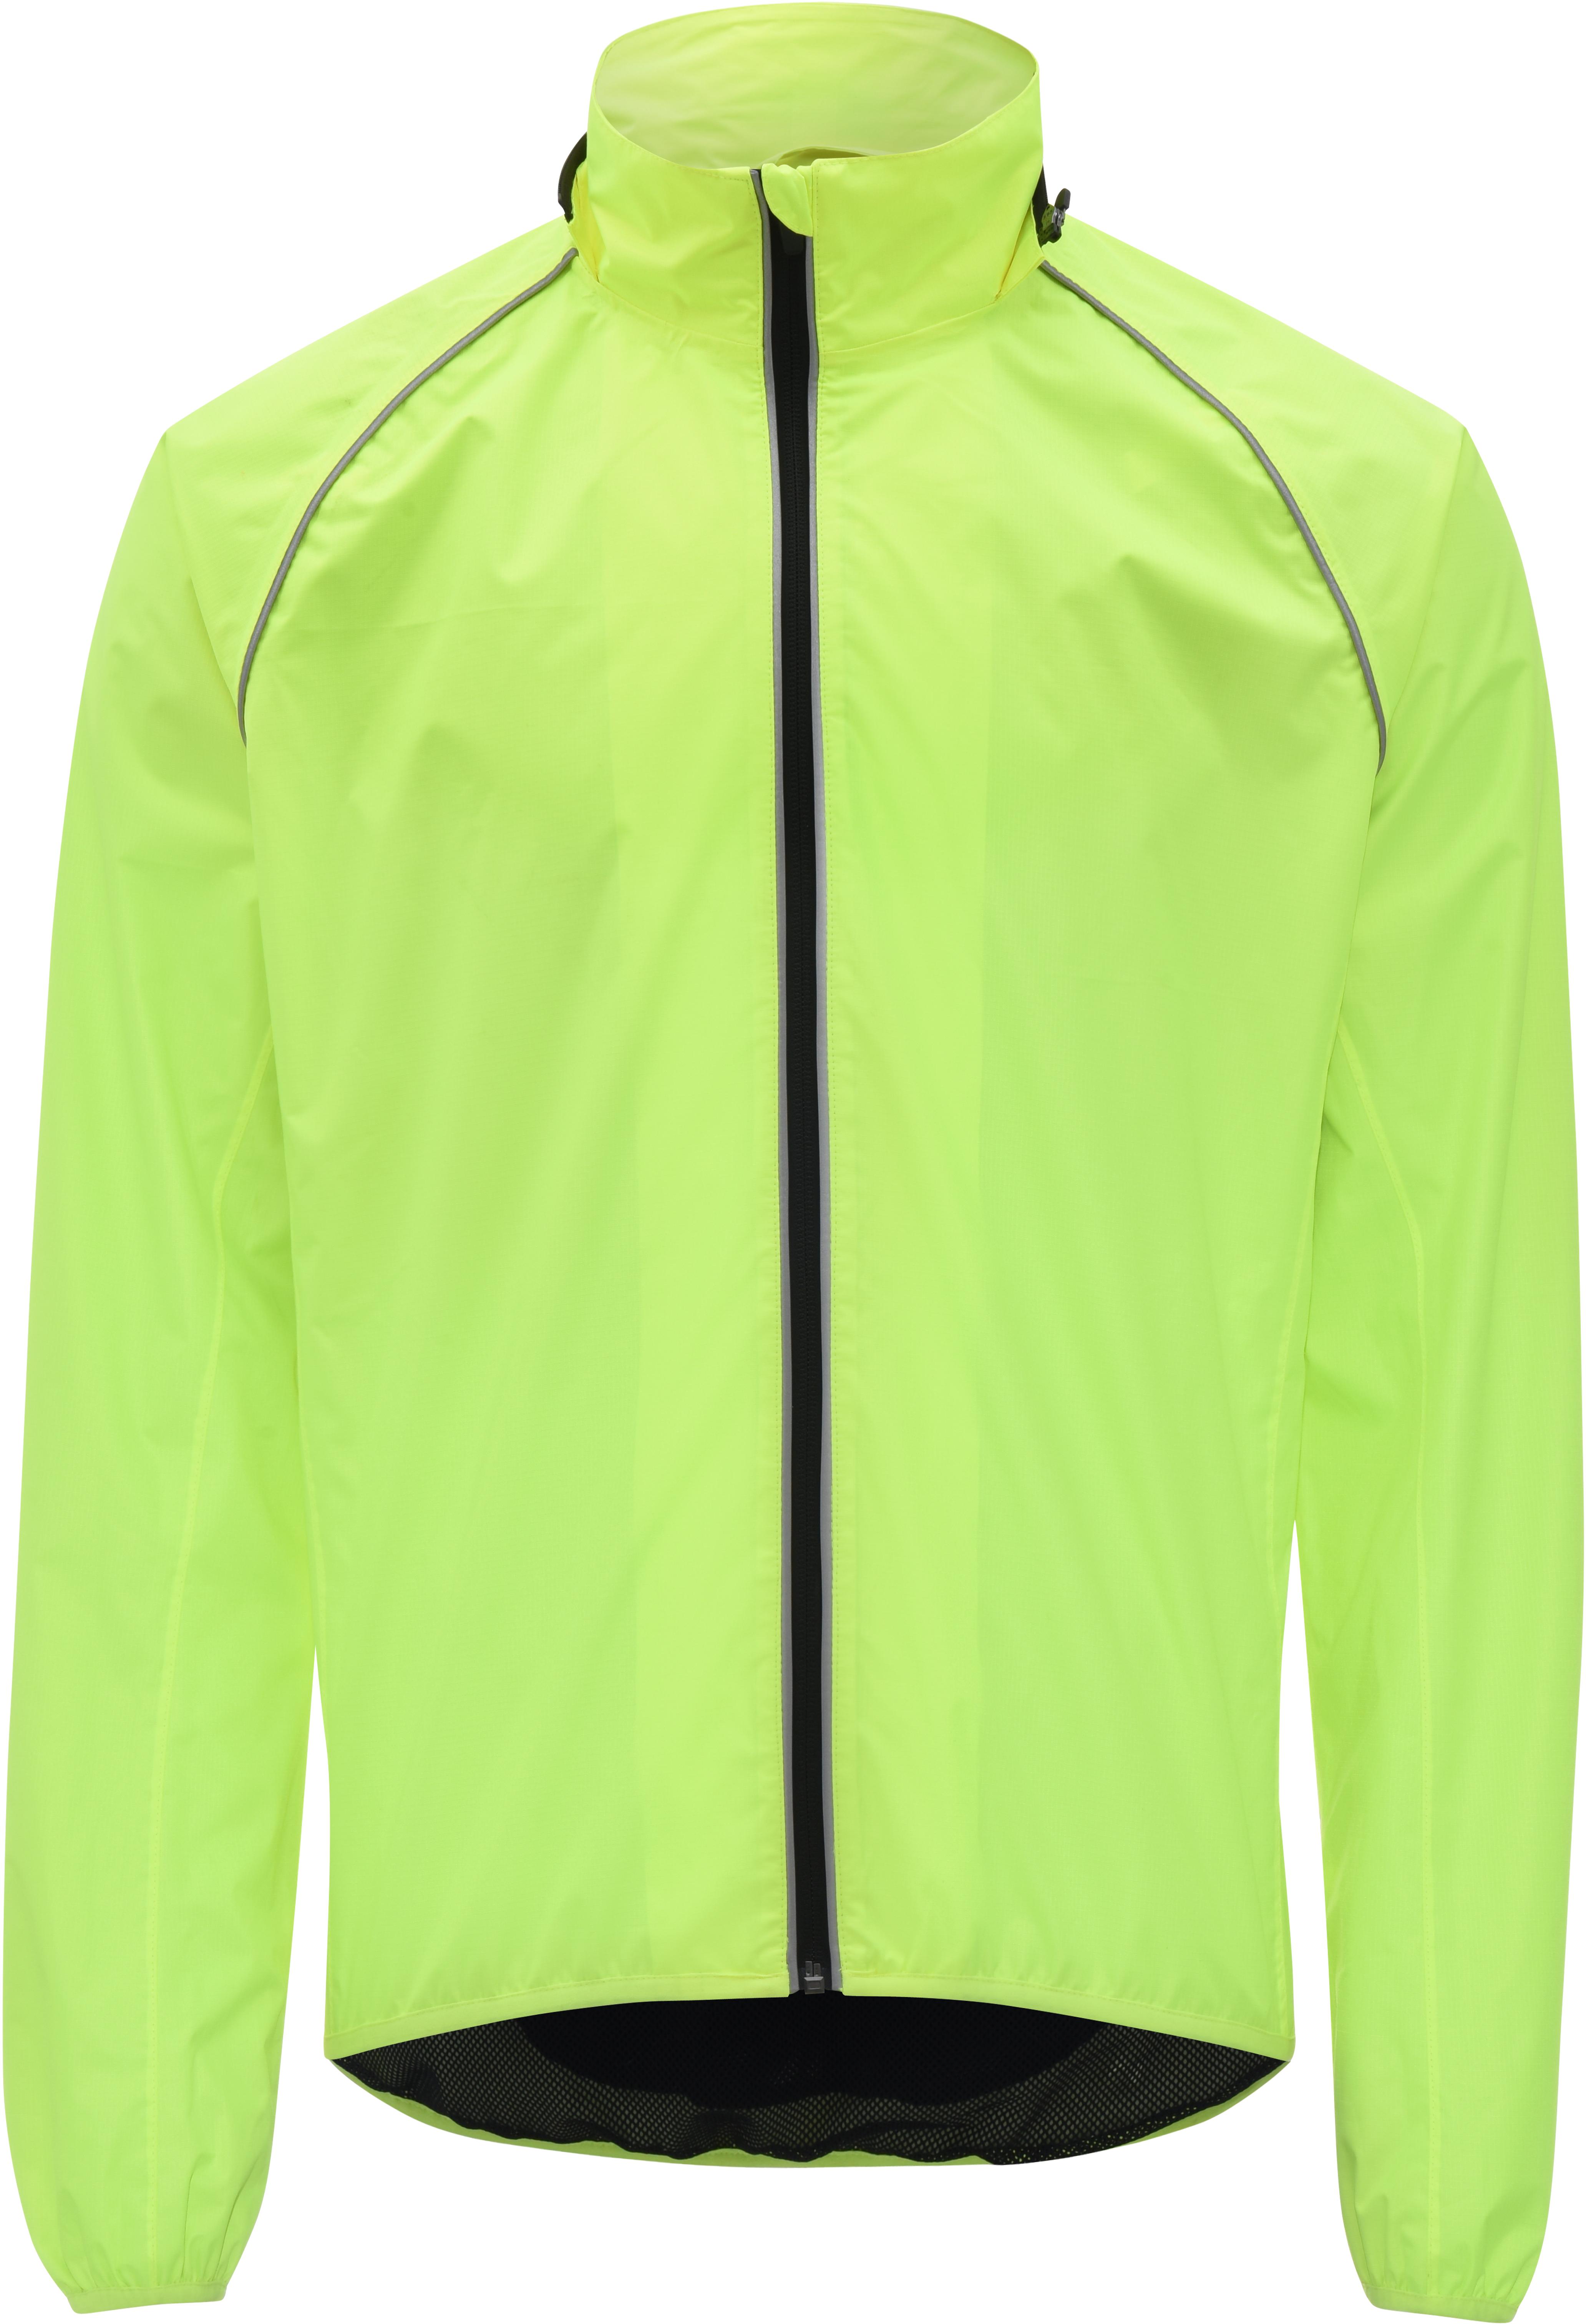 ladies fluorescent cycling jacket